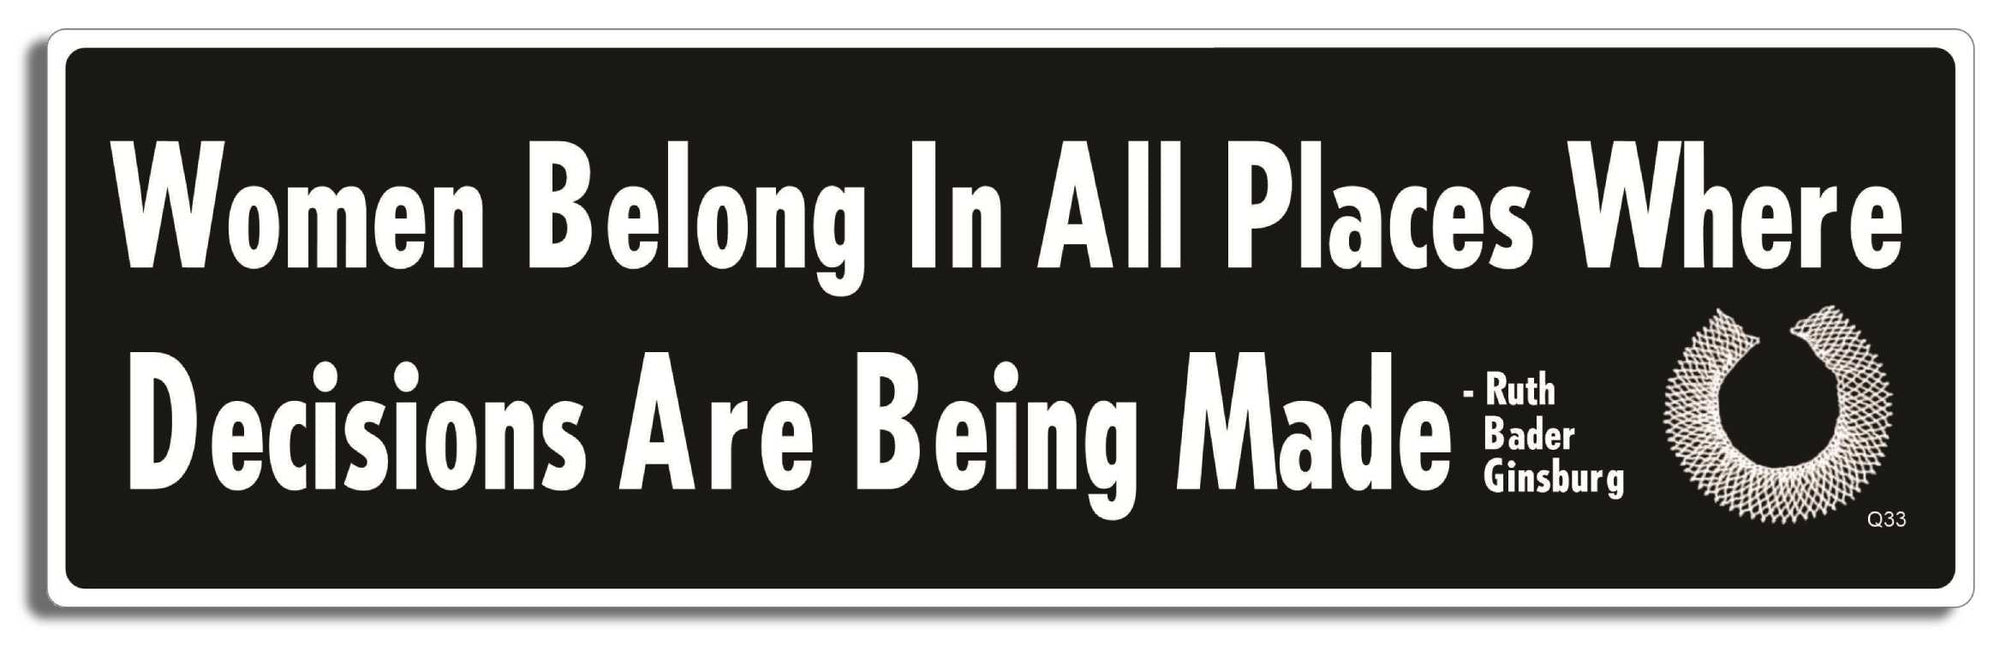 Women Belong In All Places Where Decisions Are Being Made - Ruth Bader Ginsburg -  3" x 10" Bumper Sticker--Car Magnet- -  Decal Bumper Sticker-quotation Bumper Sticker Car Magnet Women Belong In All Places Where-  Decal for cars